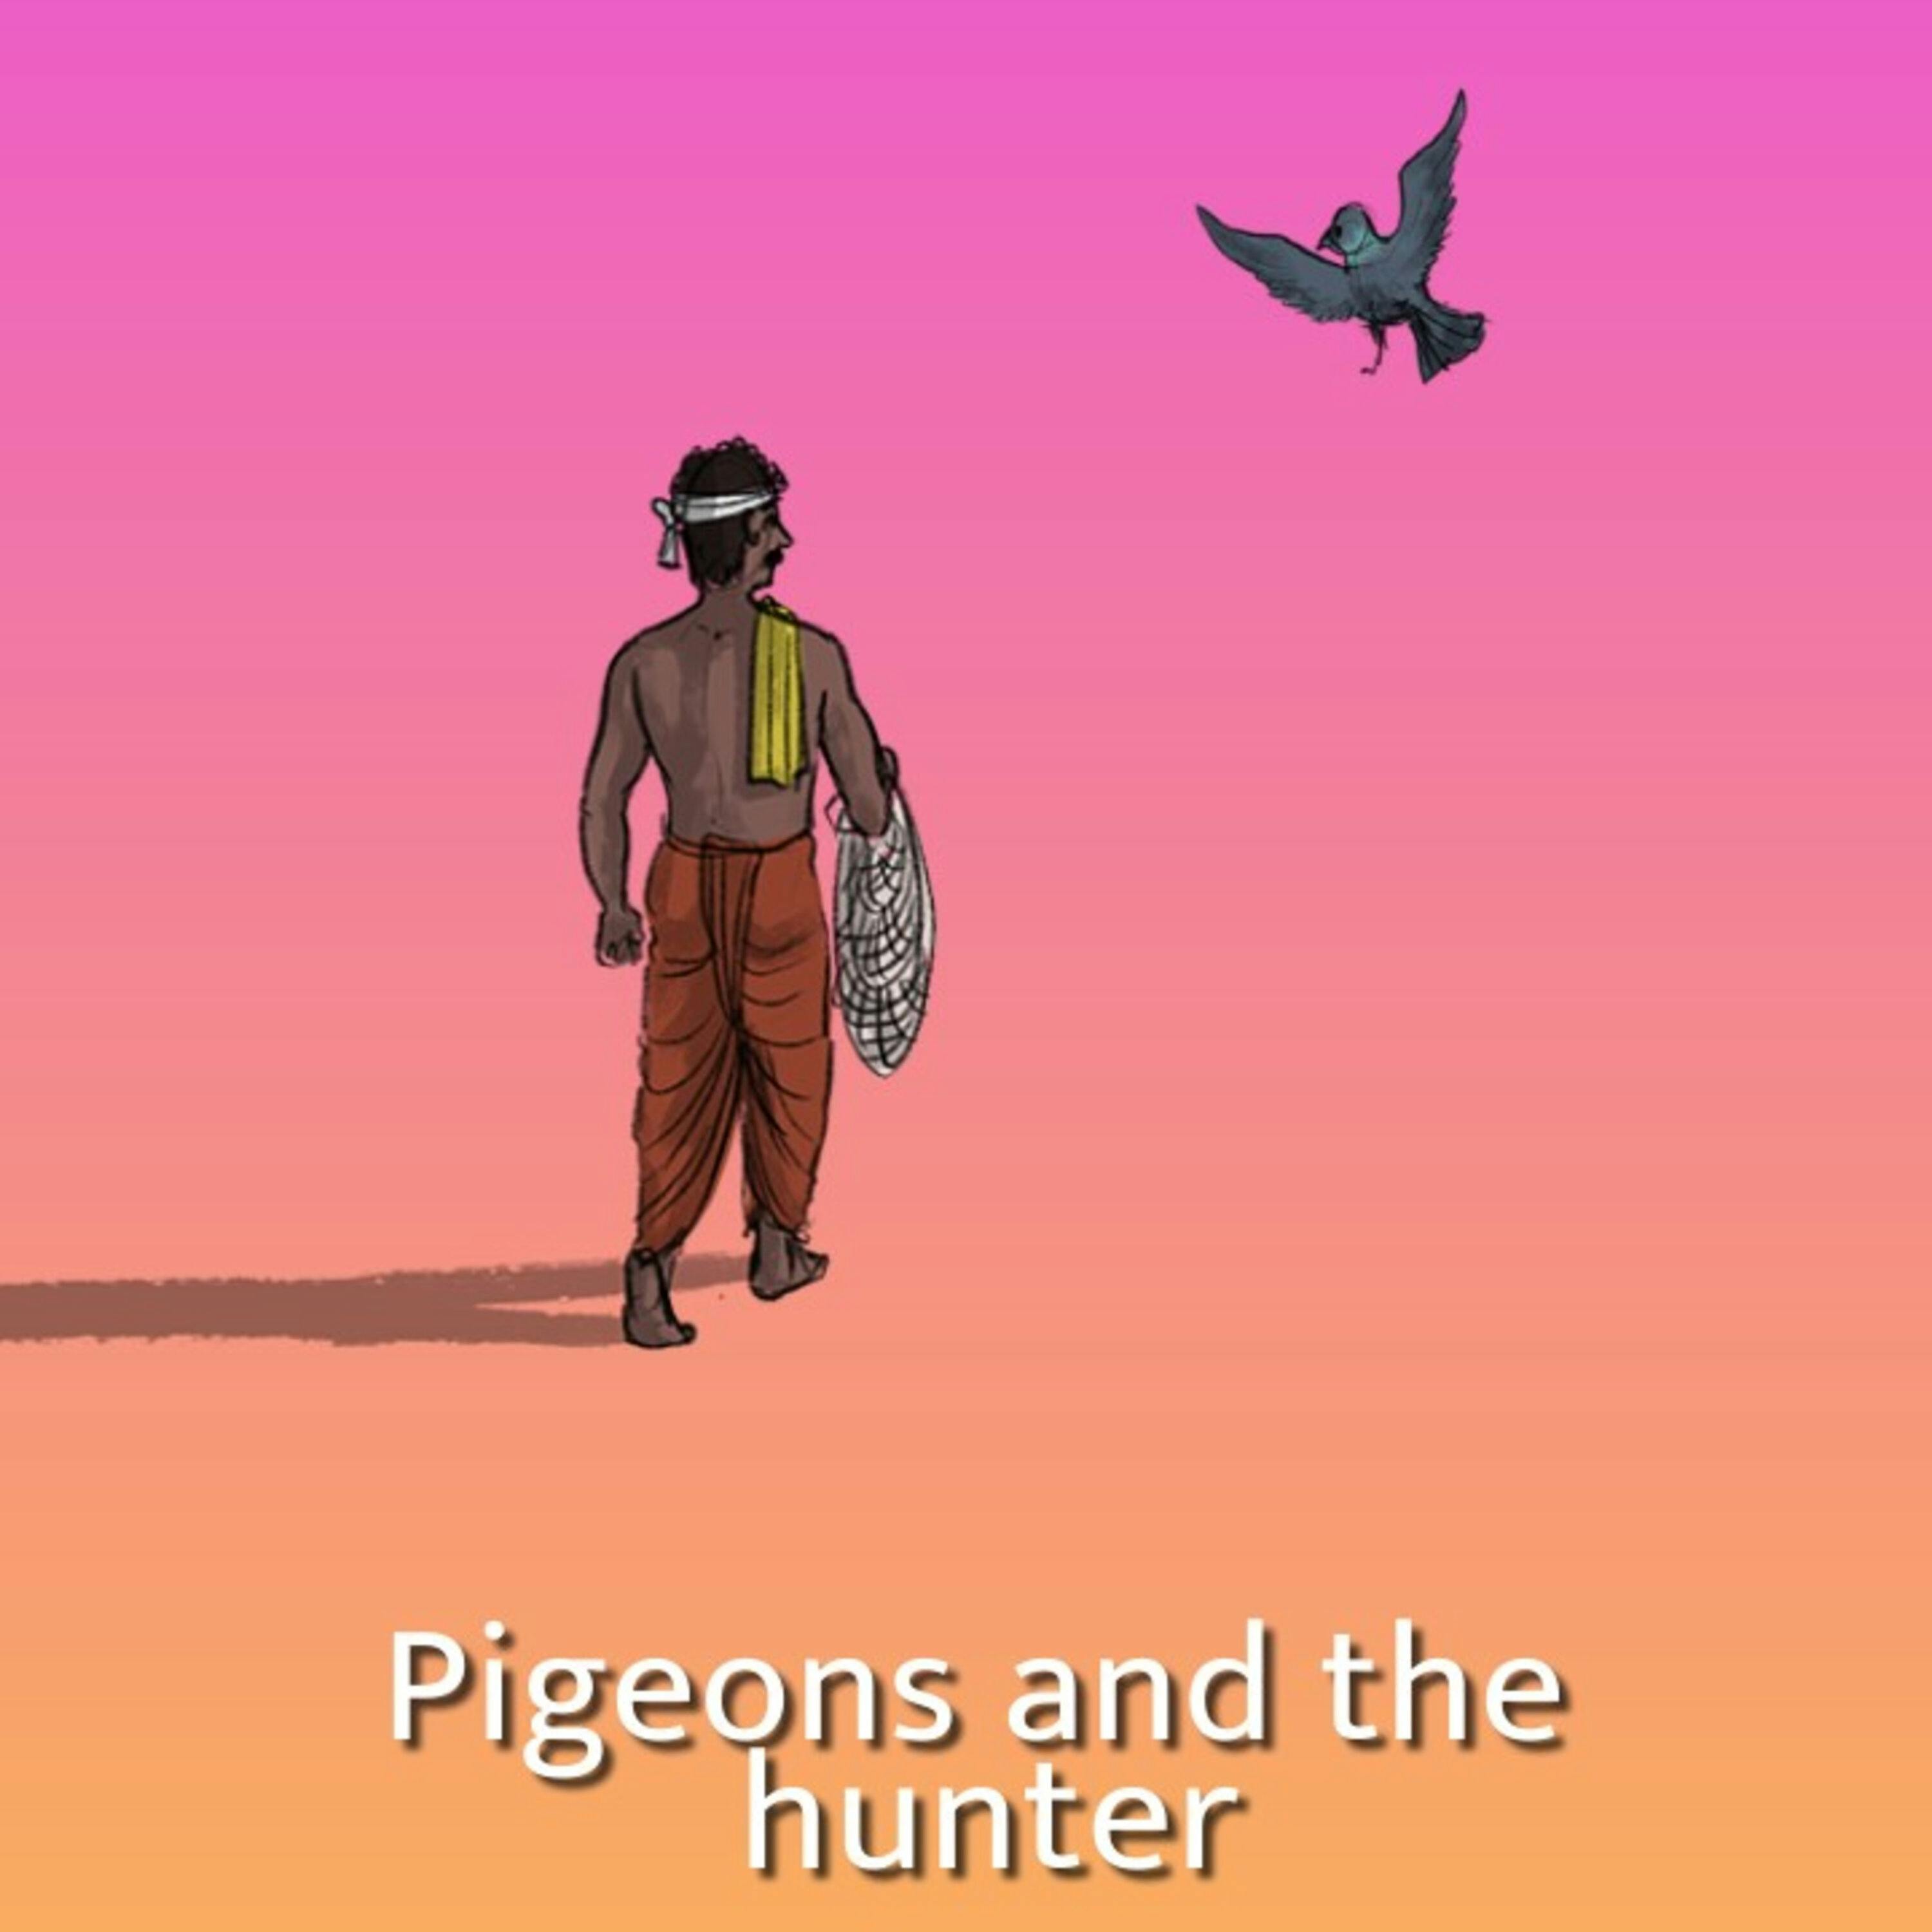 Pigeons and the hunter